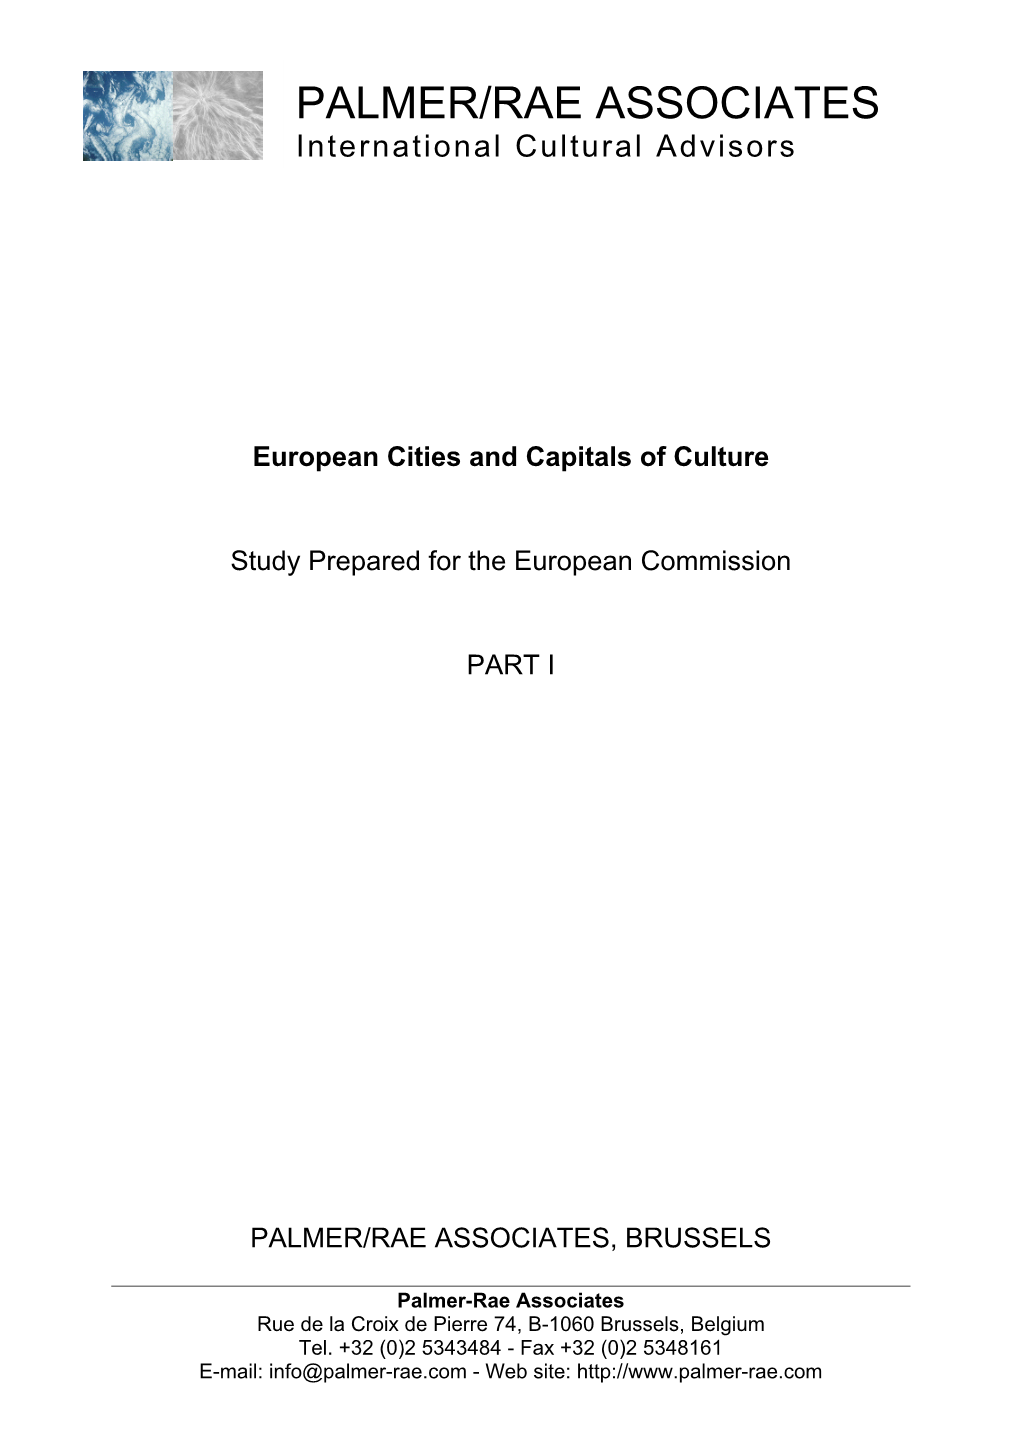 European Cities and Capitals of Culture